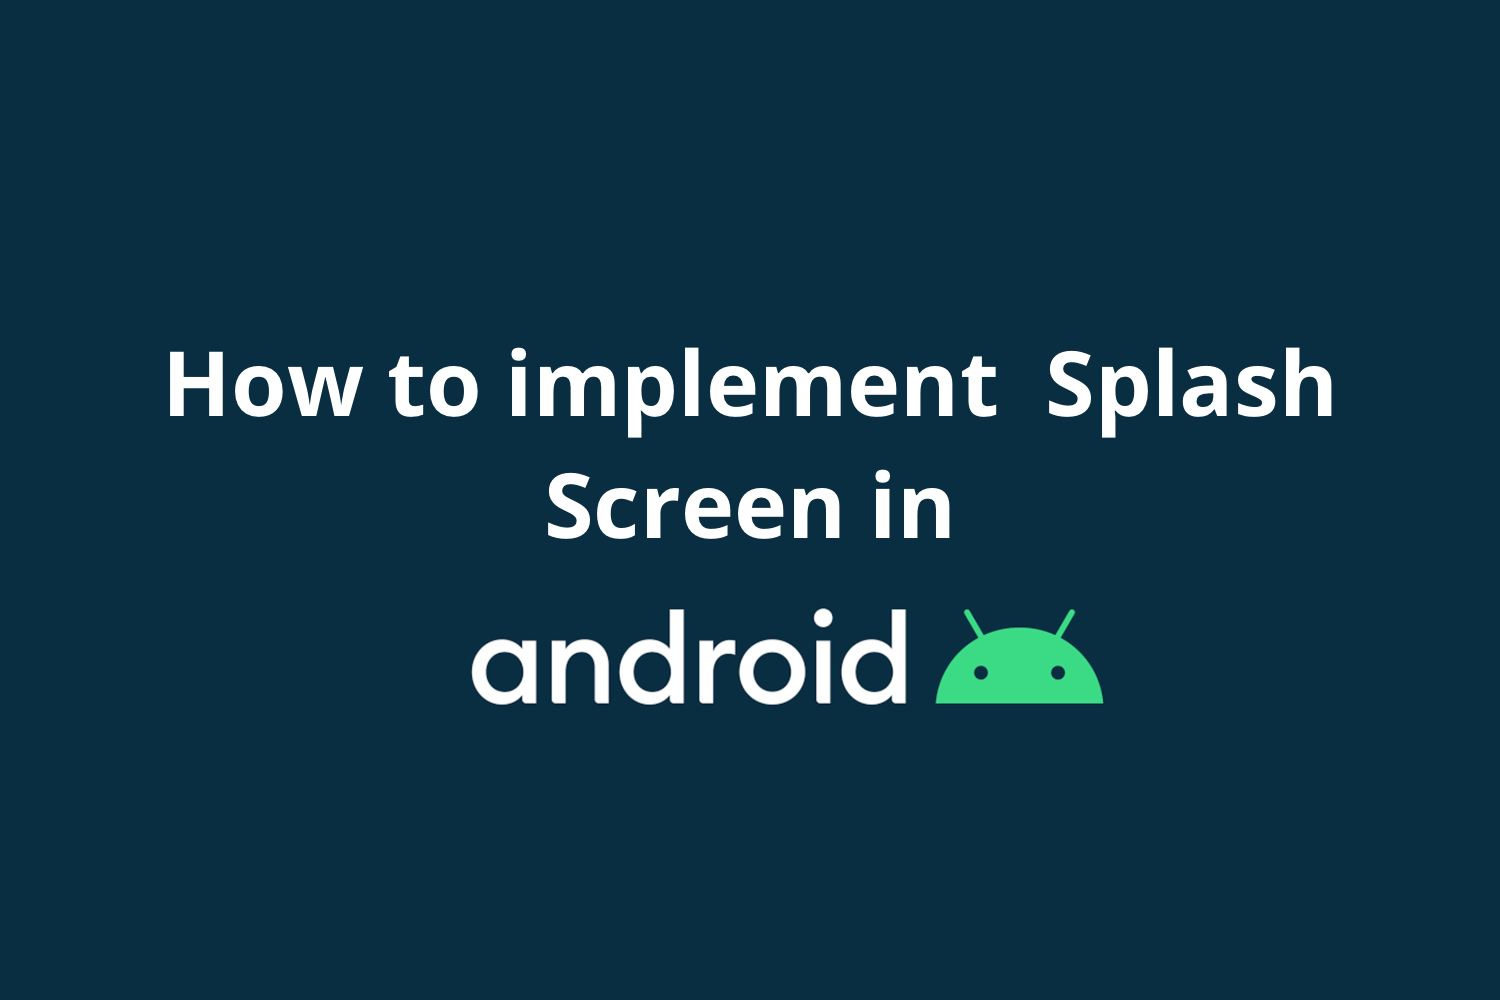 How to implement Splash Screen in Android?